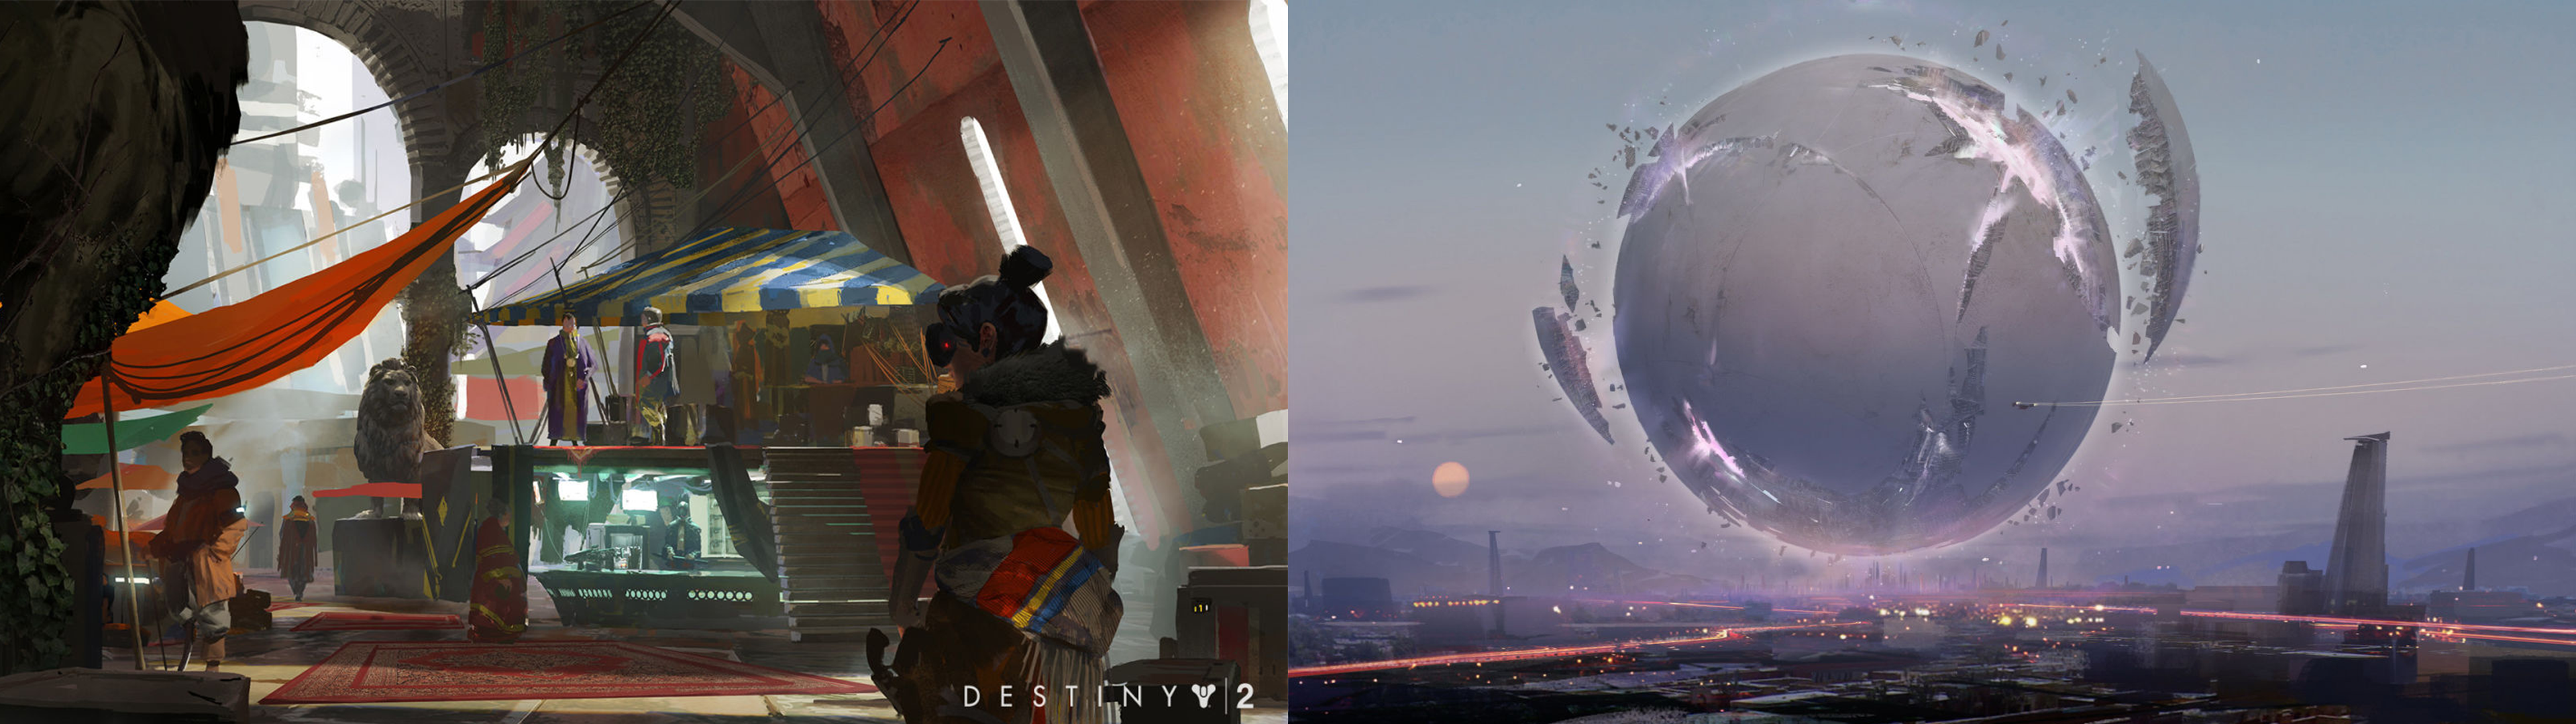 Destiny 2 Dual Monitor Wallpapers